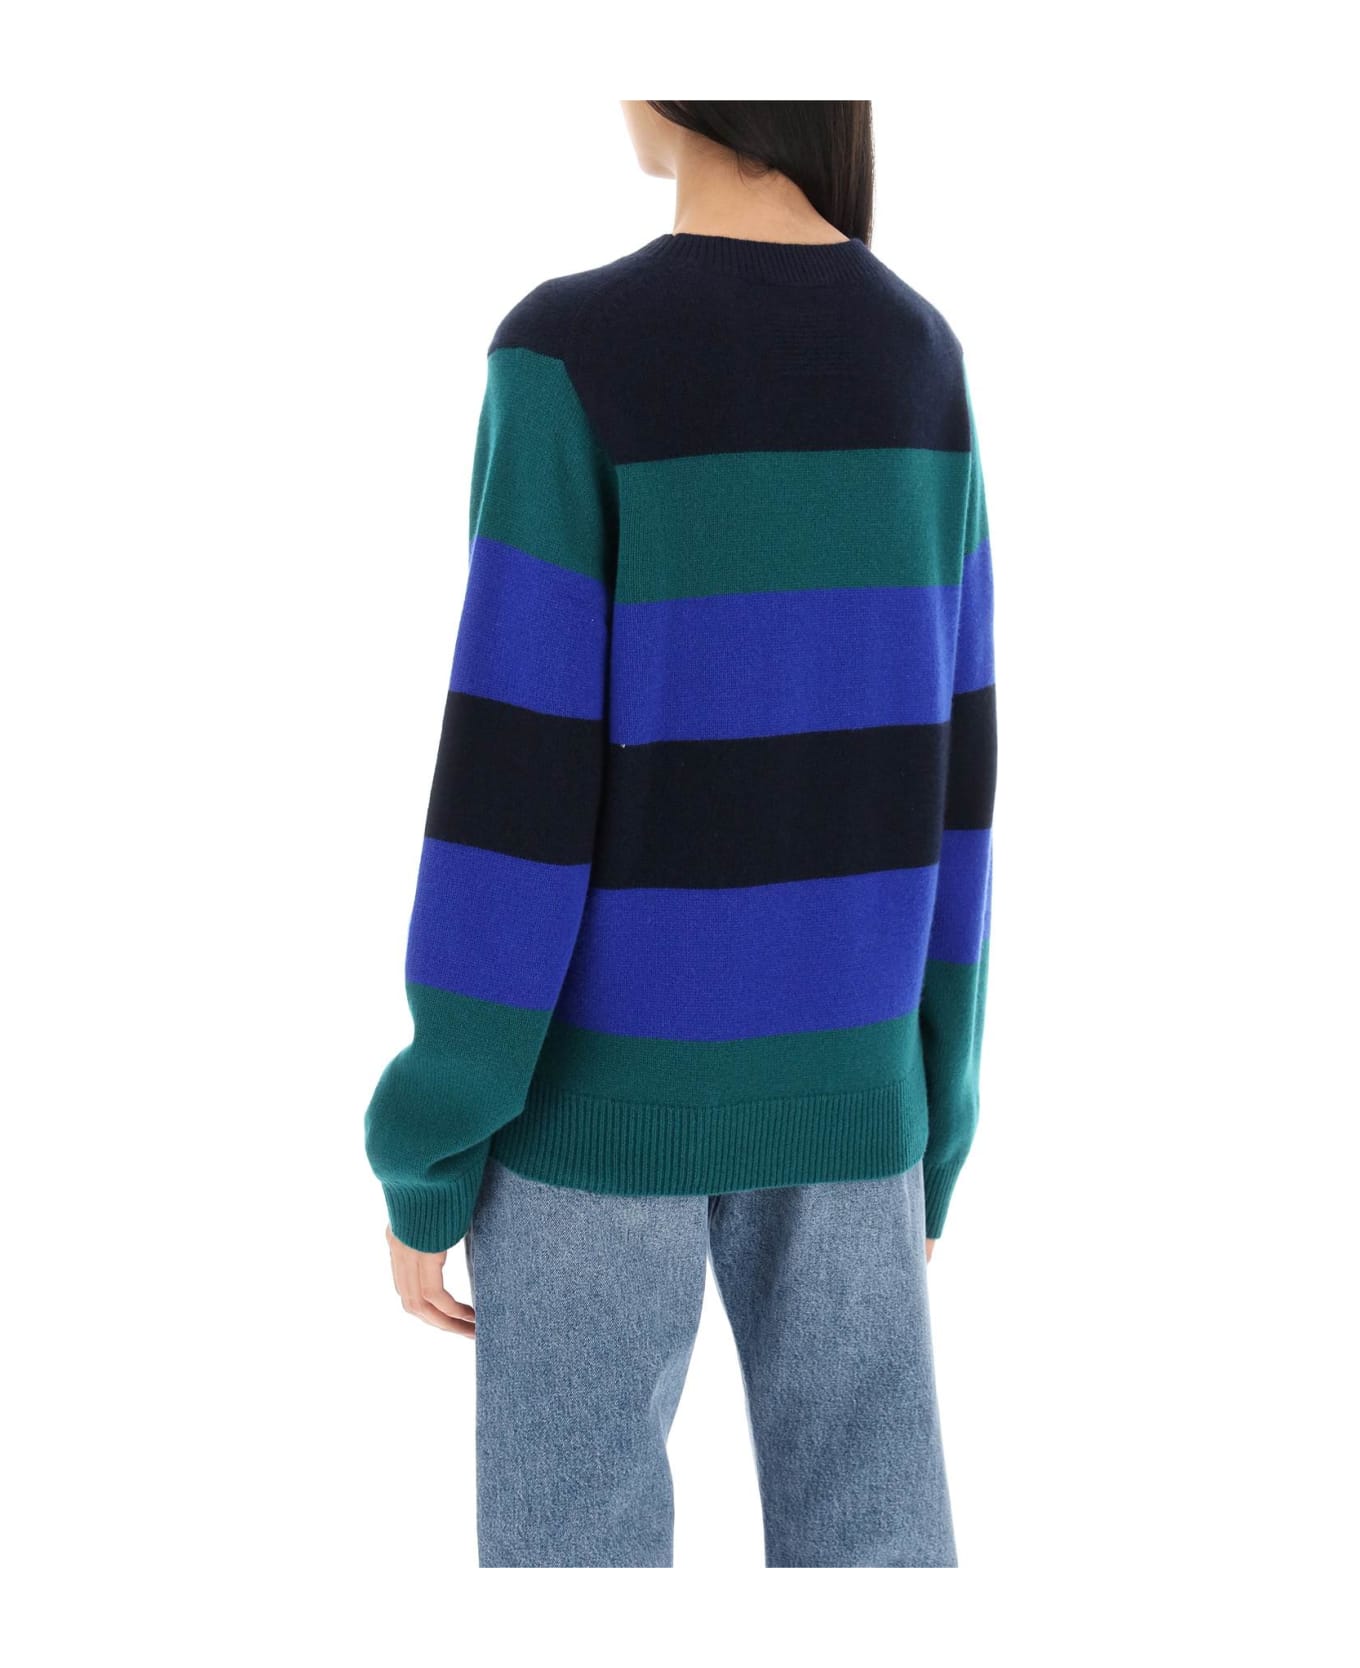 Guest in Residence Striped Cashmere Sweater - FOREST COBALT MIDNIGHT (Green)